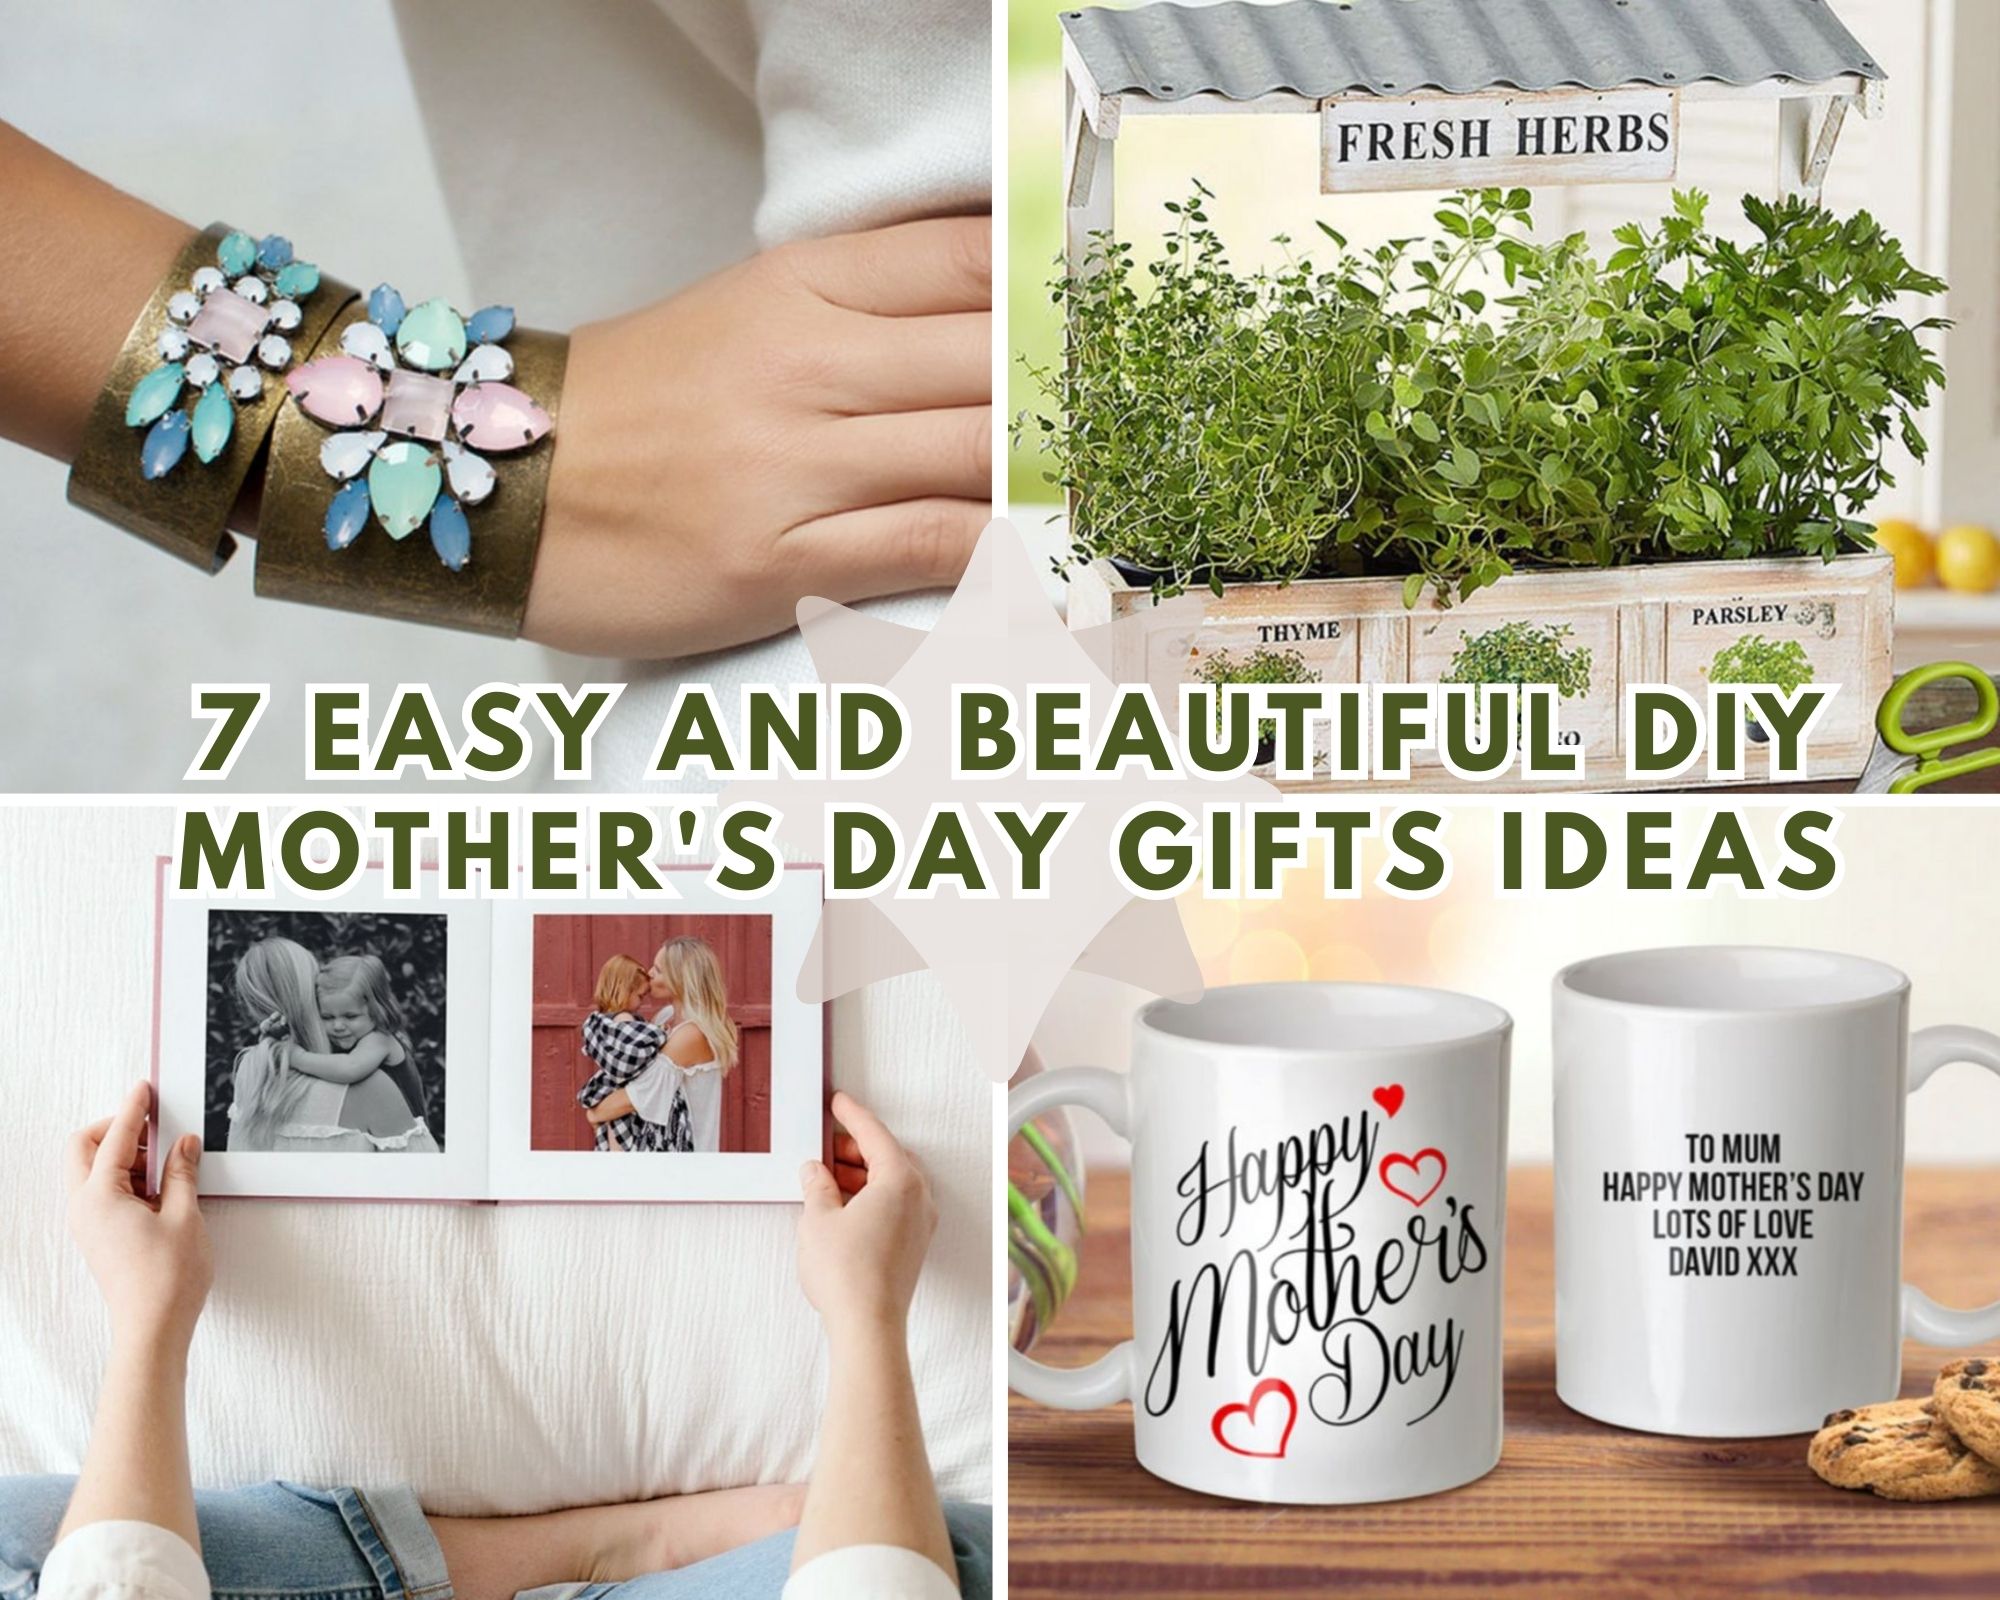 7 Easy And Beautiful DIY Mother’s Day Gifts Ideas